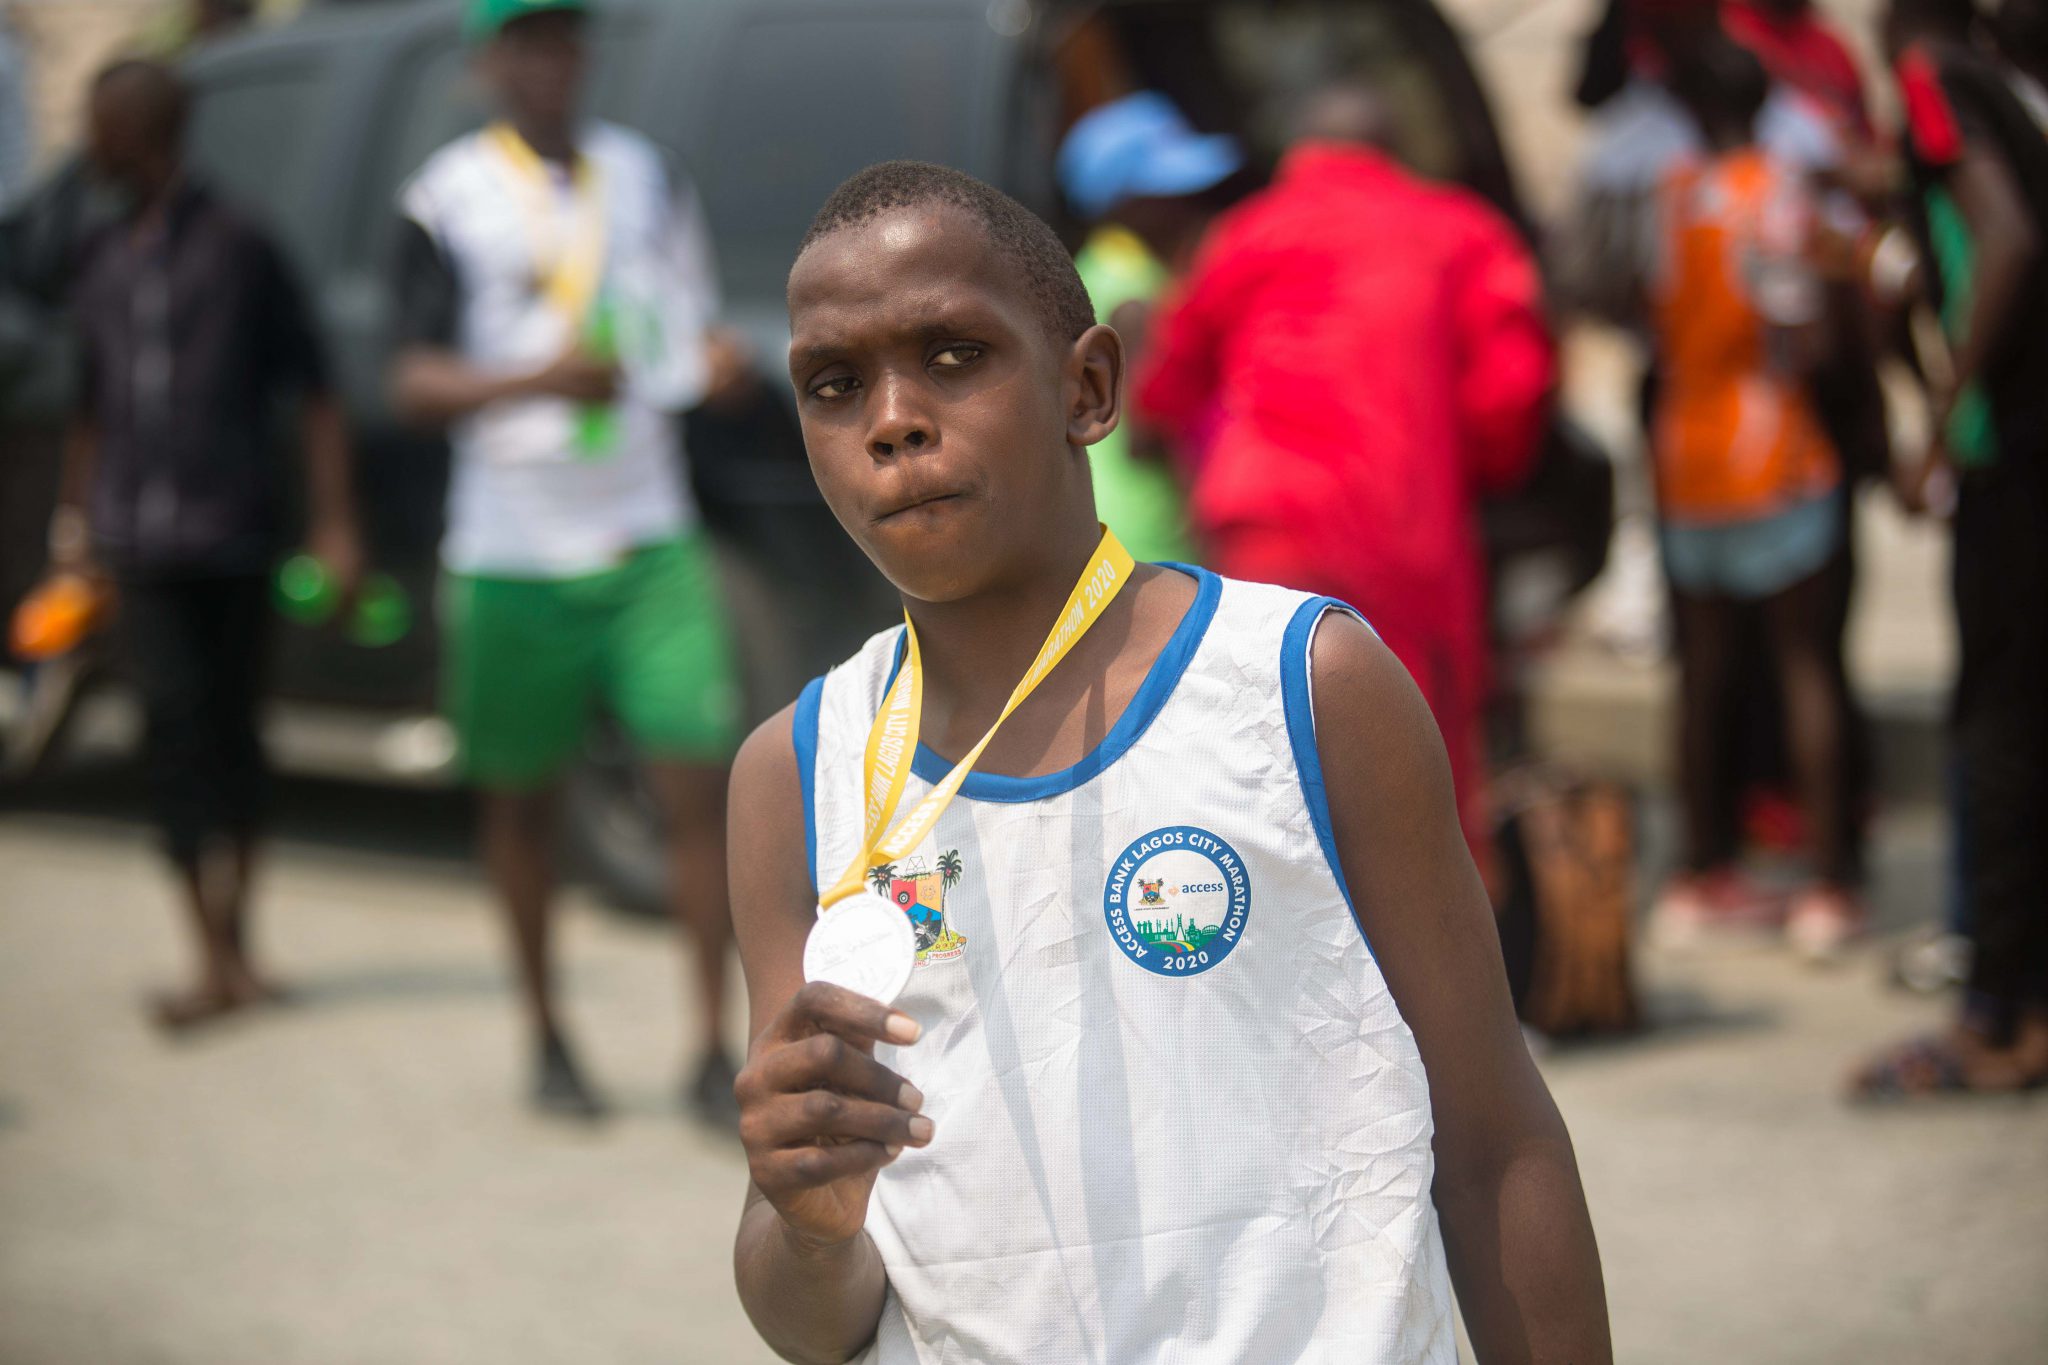 The Run For Inclusion - Special Olympics Nigeria